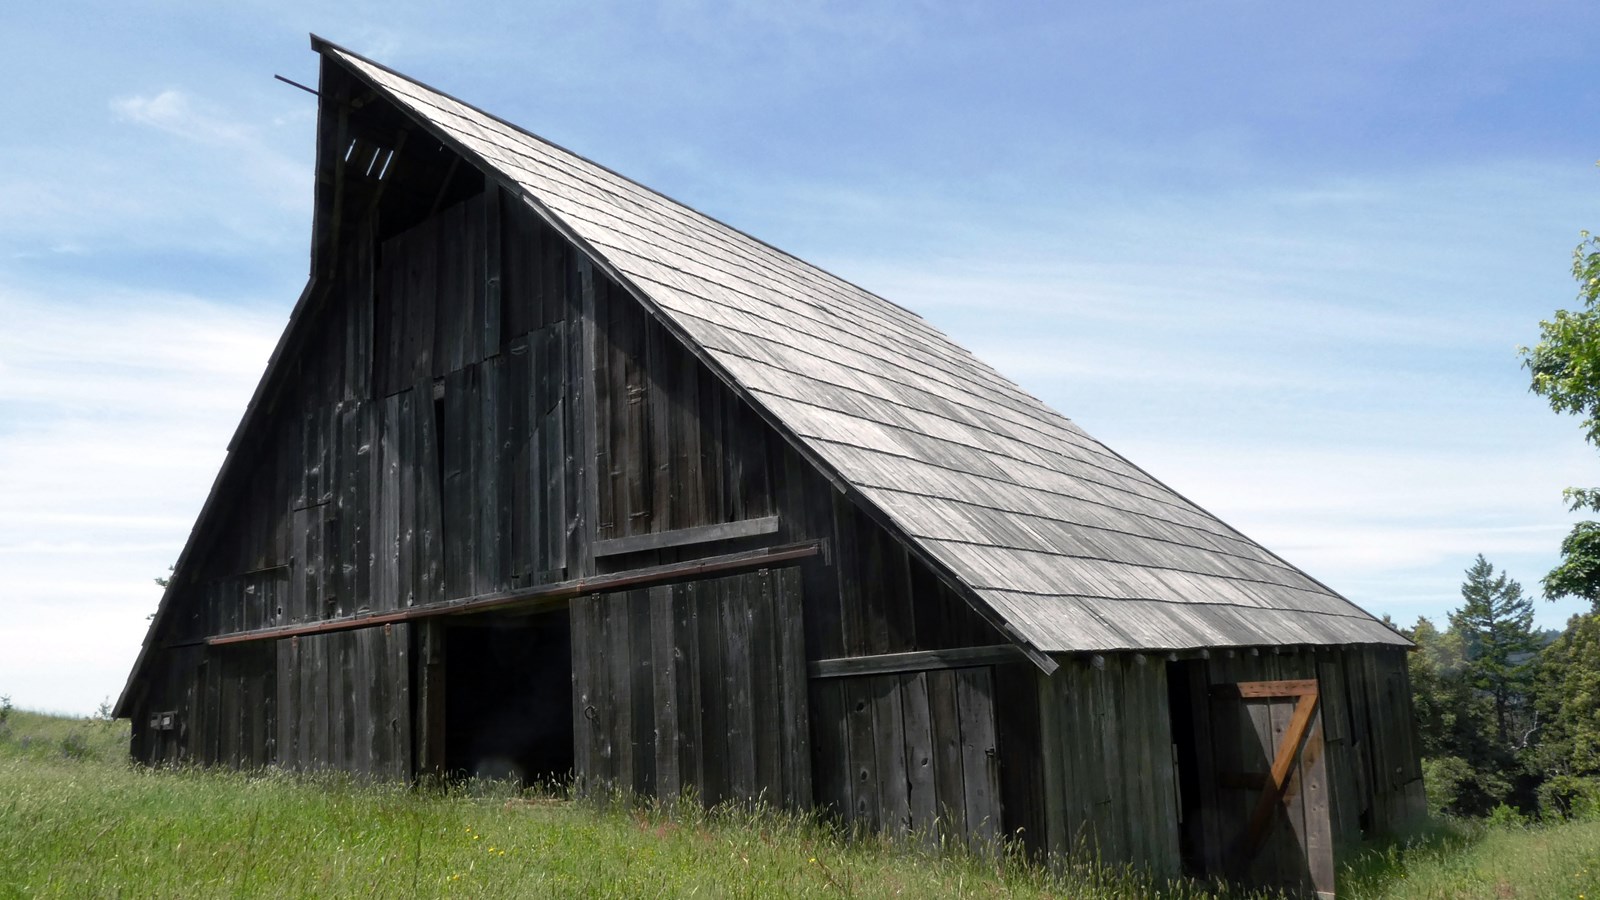 Green grass surrounds a two-story wooden barn.